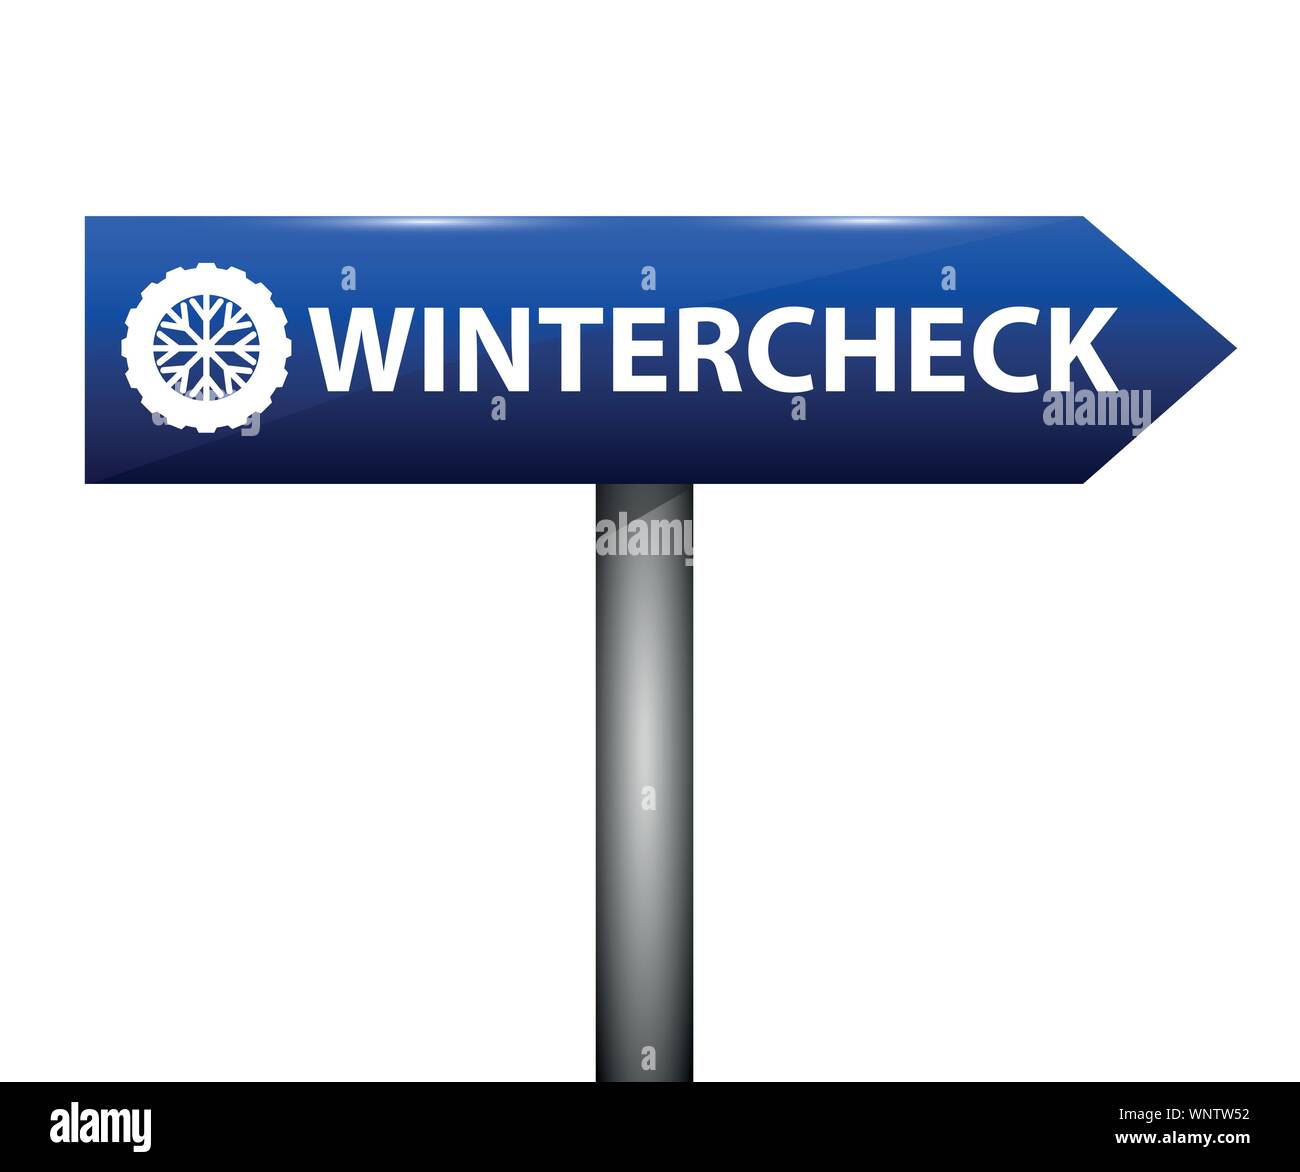 wintercheck car tires typography on a blue road sign vector illustration EPS10 Stock Vector